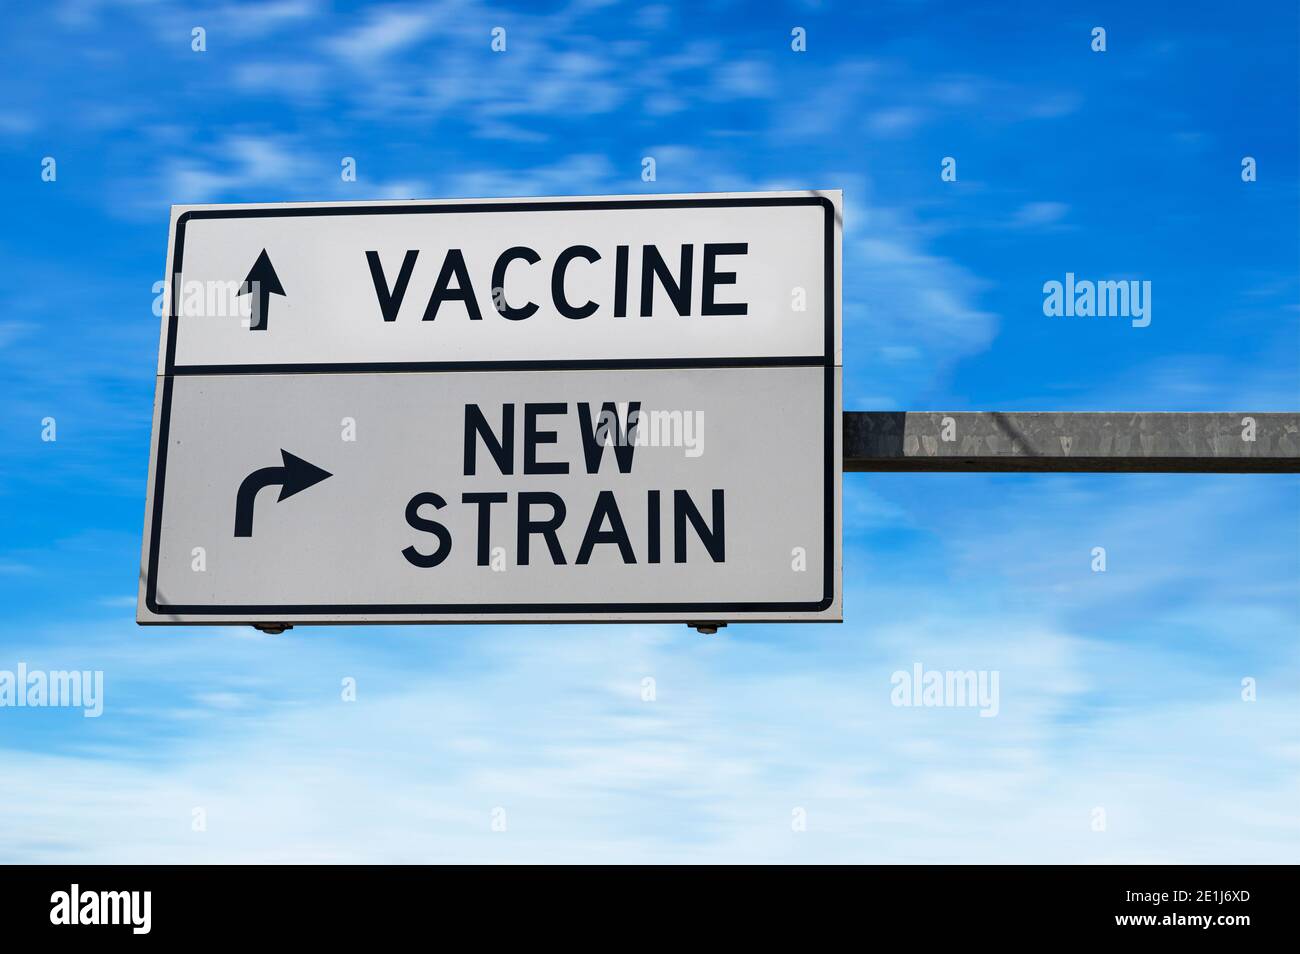 Road sign with words vaccine and new strain. White two street signs with arrow on metal pole. Stock Photo